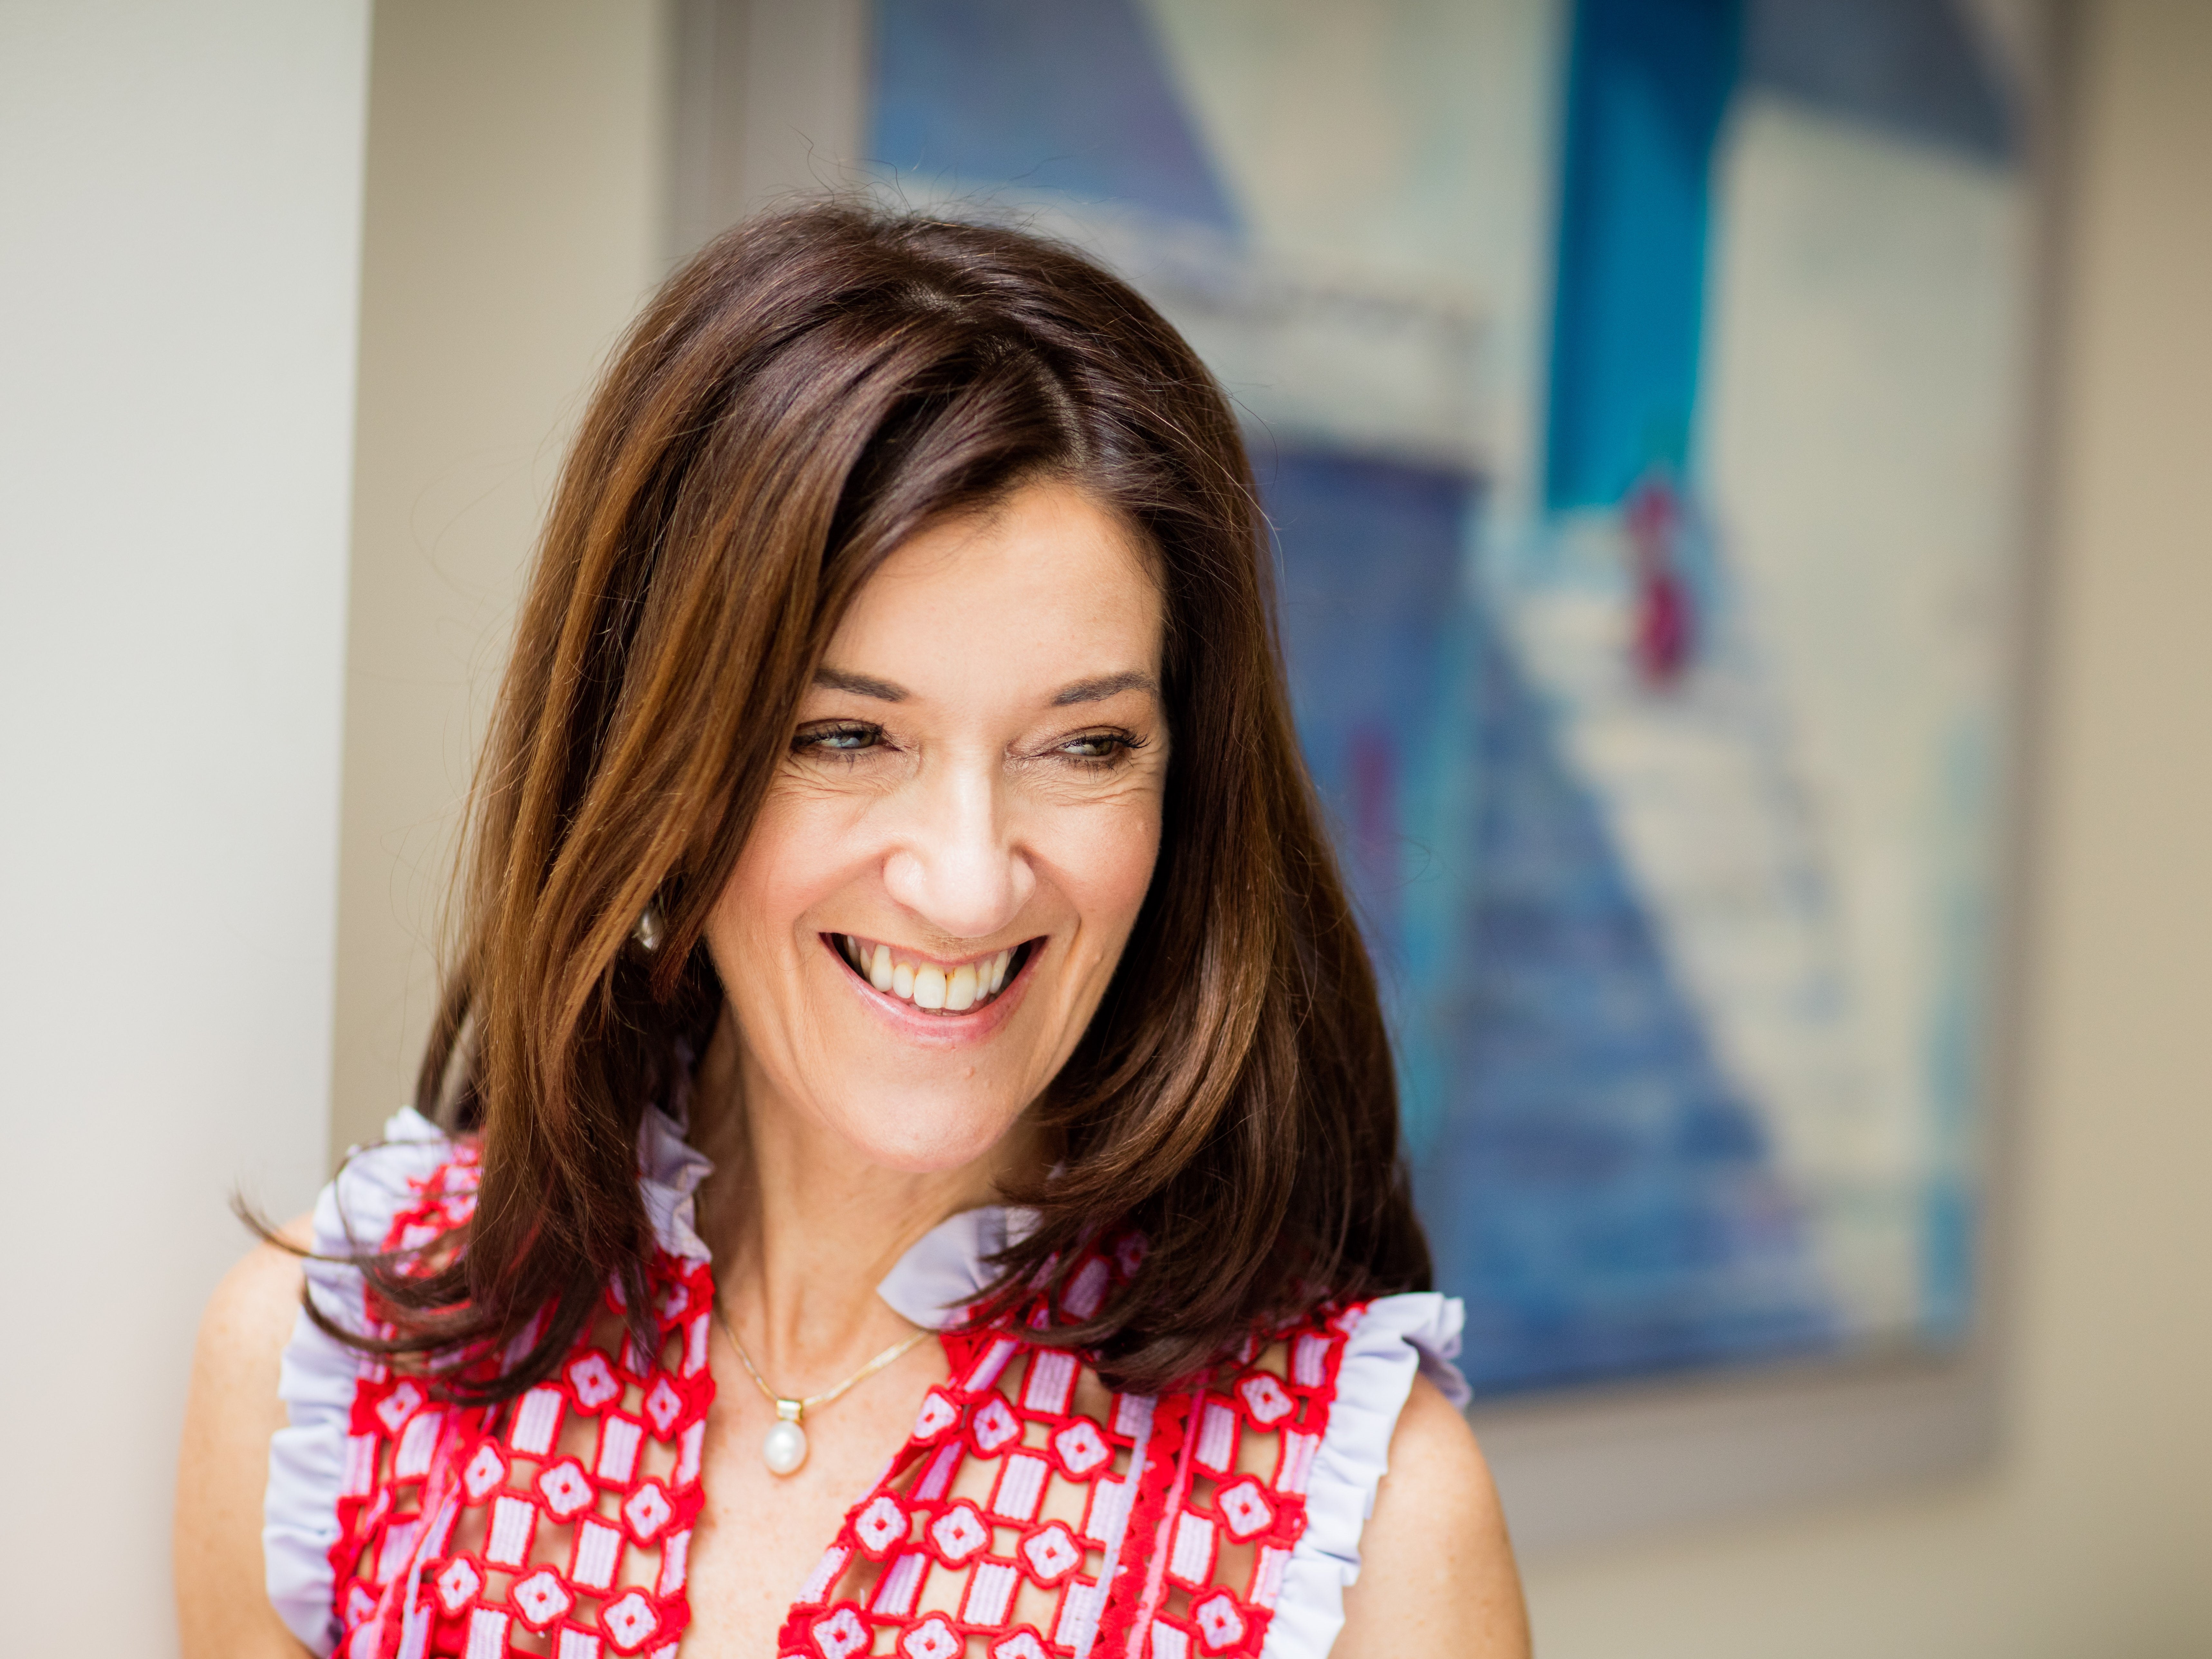 Victoria Hislop has written about the scourge of taking archaeological finds from ancient sites